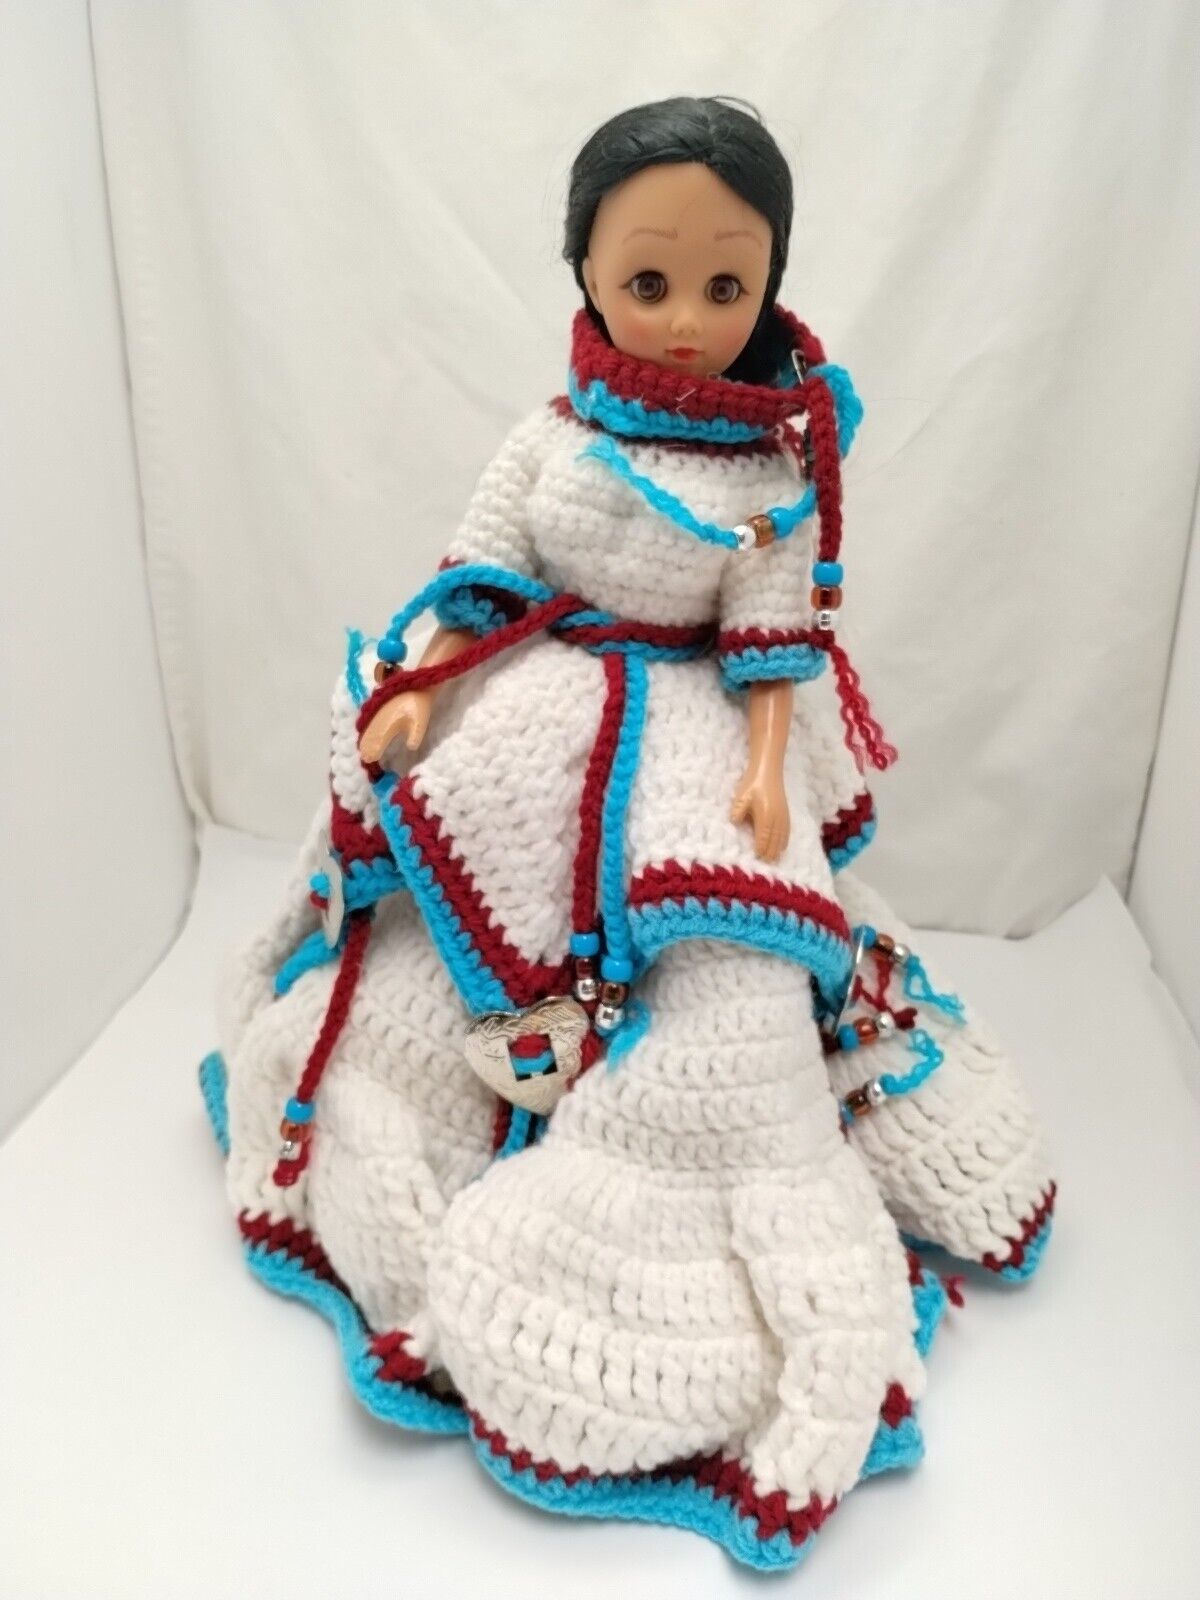 Native American Indian Doll with Handmade Crocheted Dress on a Stand Vintage